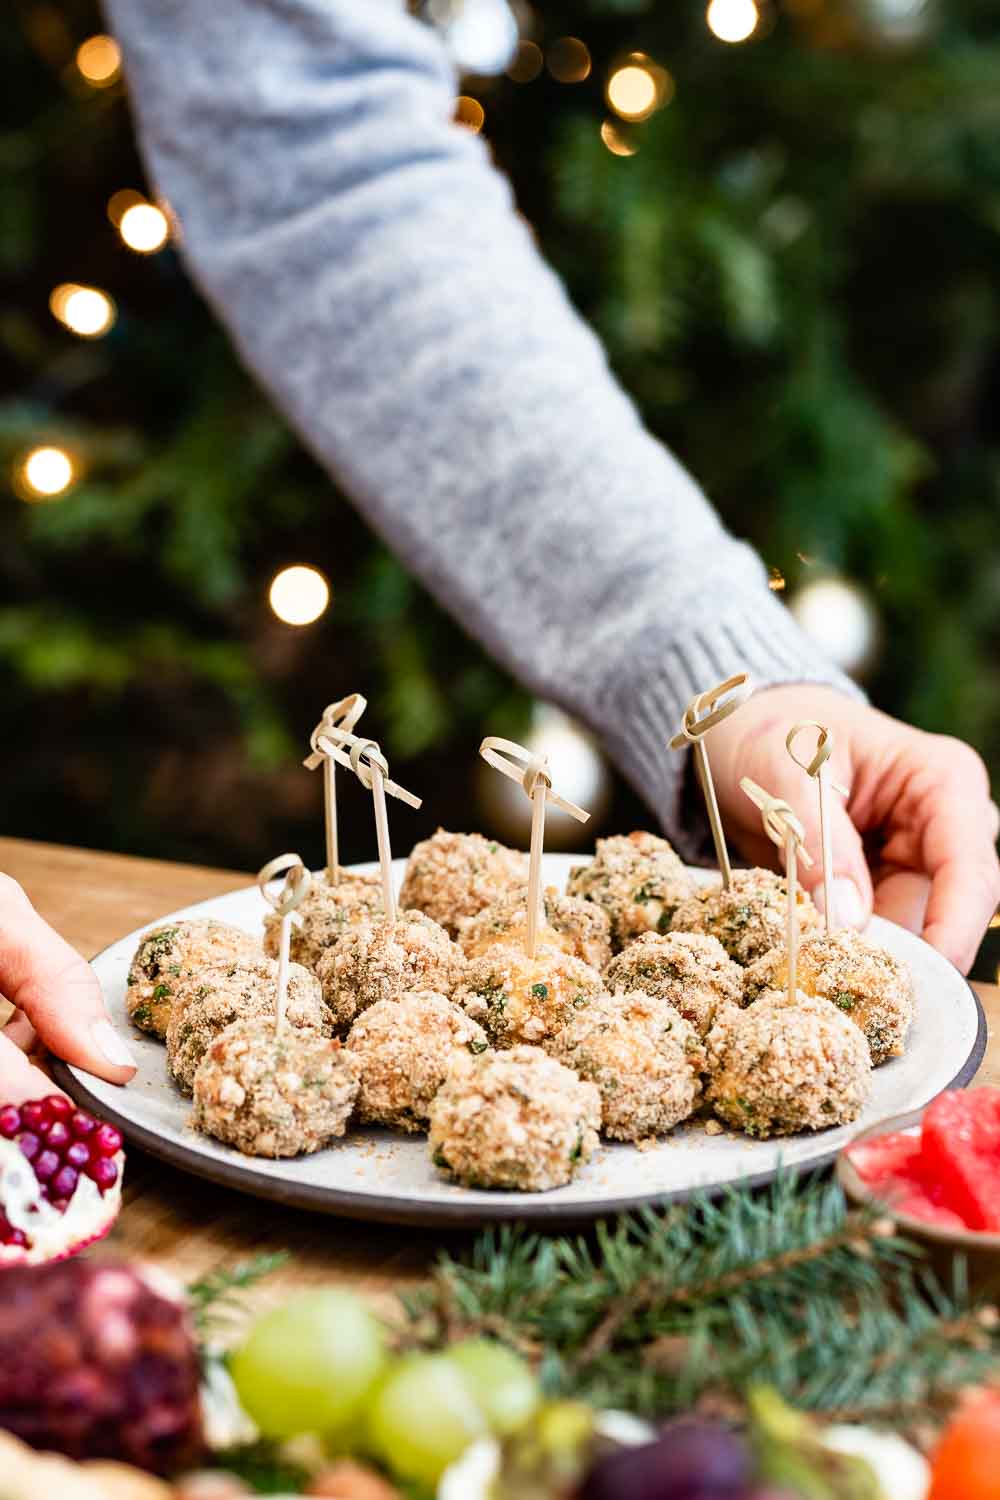 Warm Baked Goat Cheese balls are photographed as they are being served